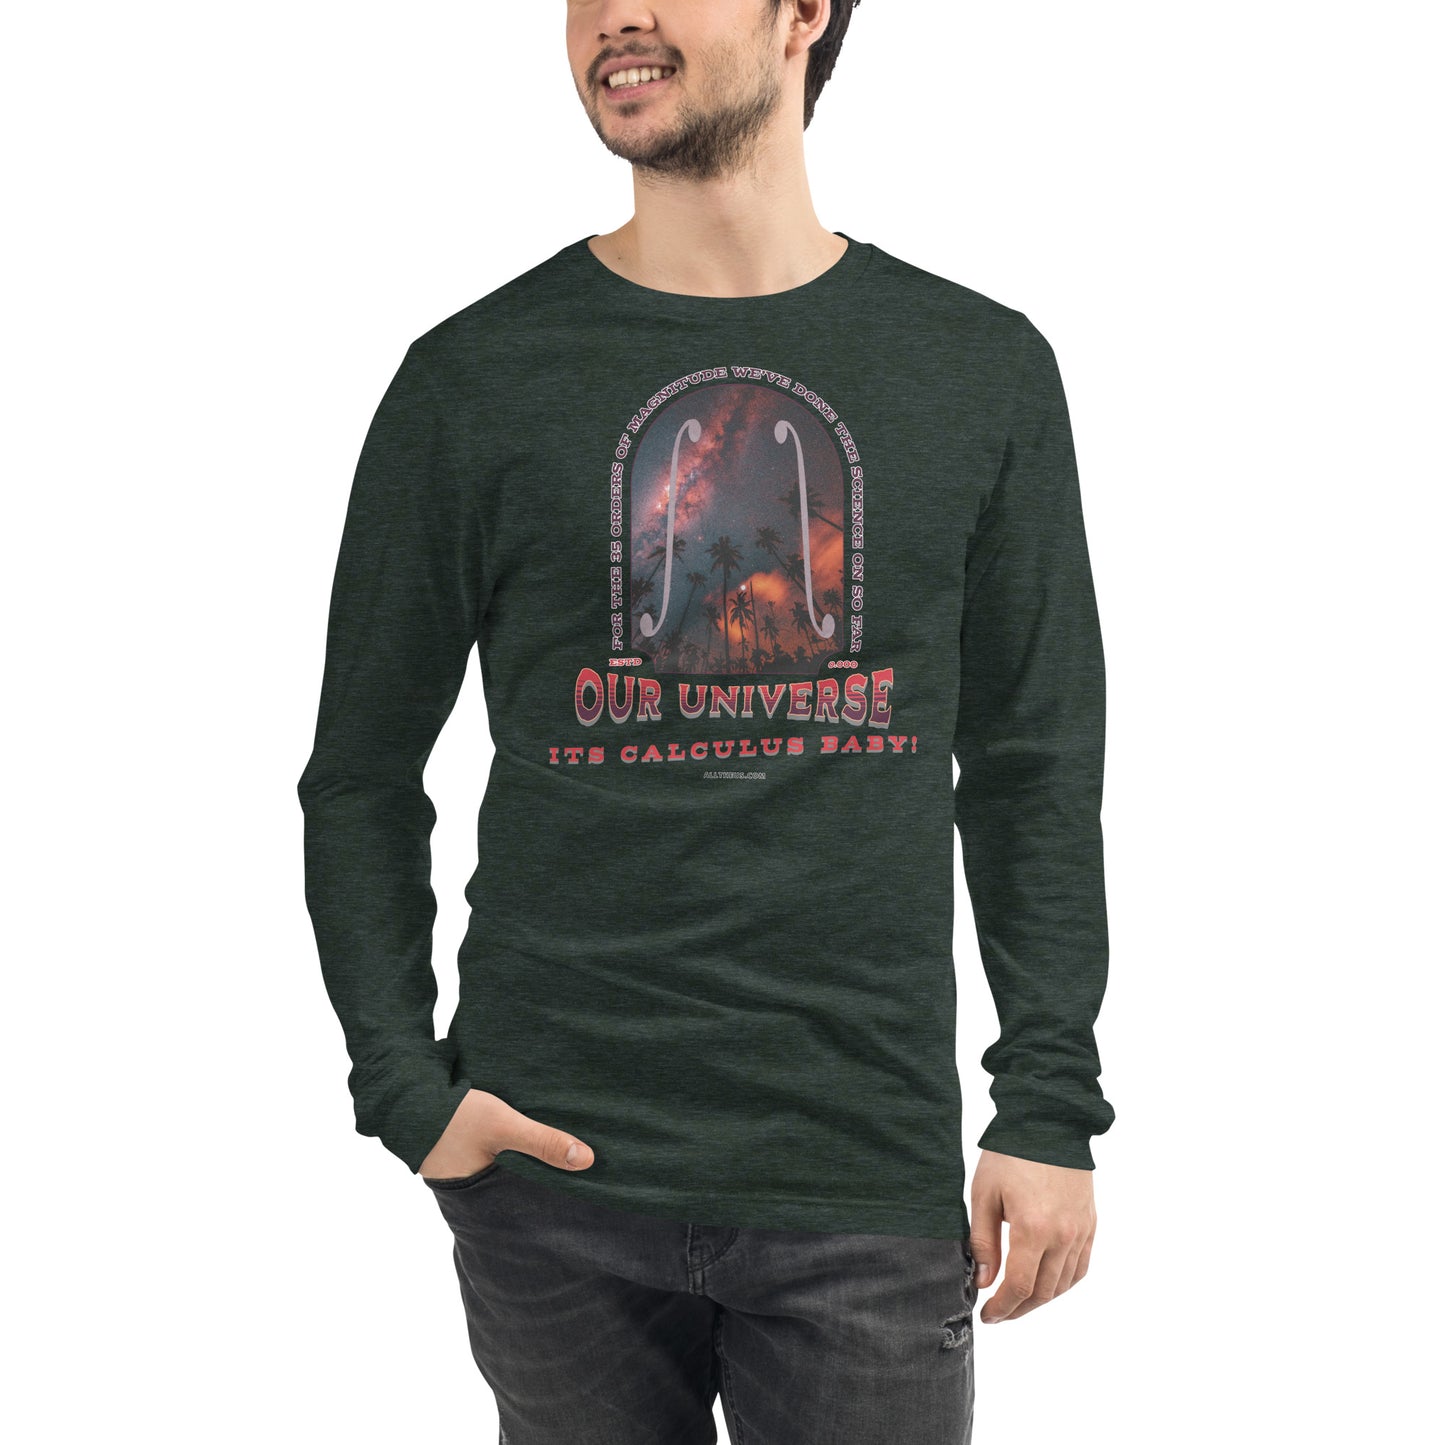 Unisex Long Sleeve Tee - Our Red Shifted Universe, Its Calculus Baby!